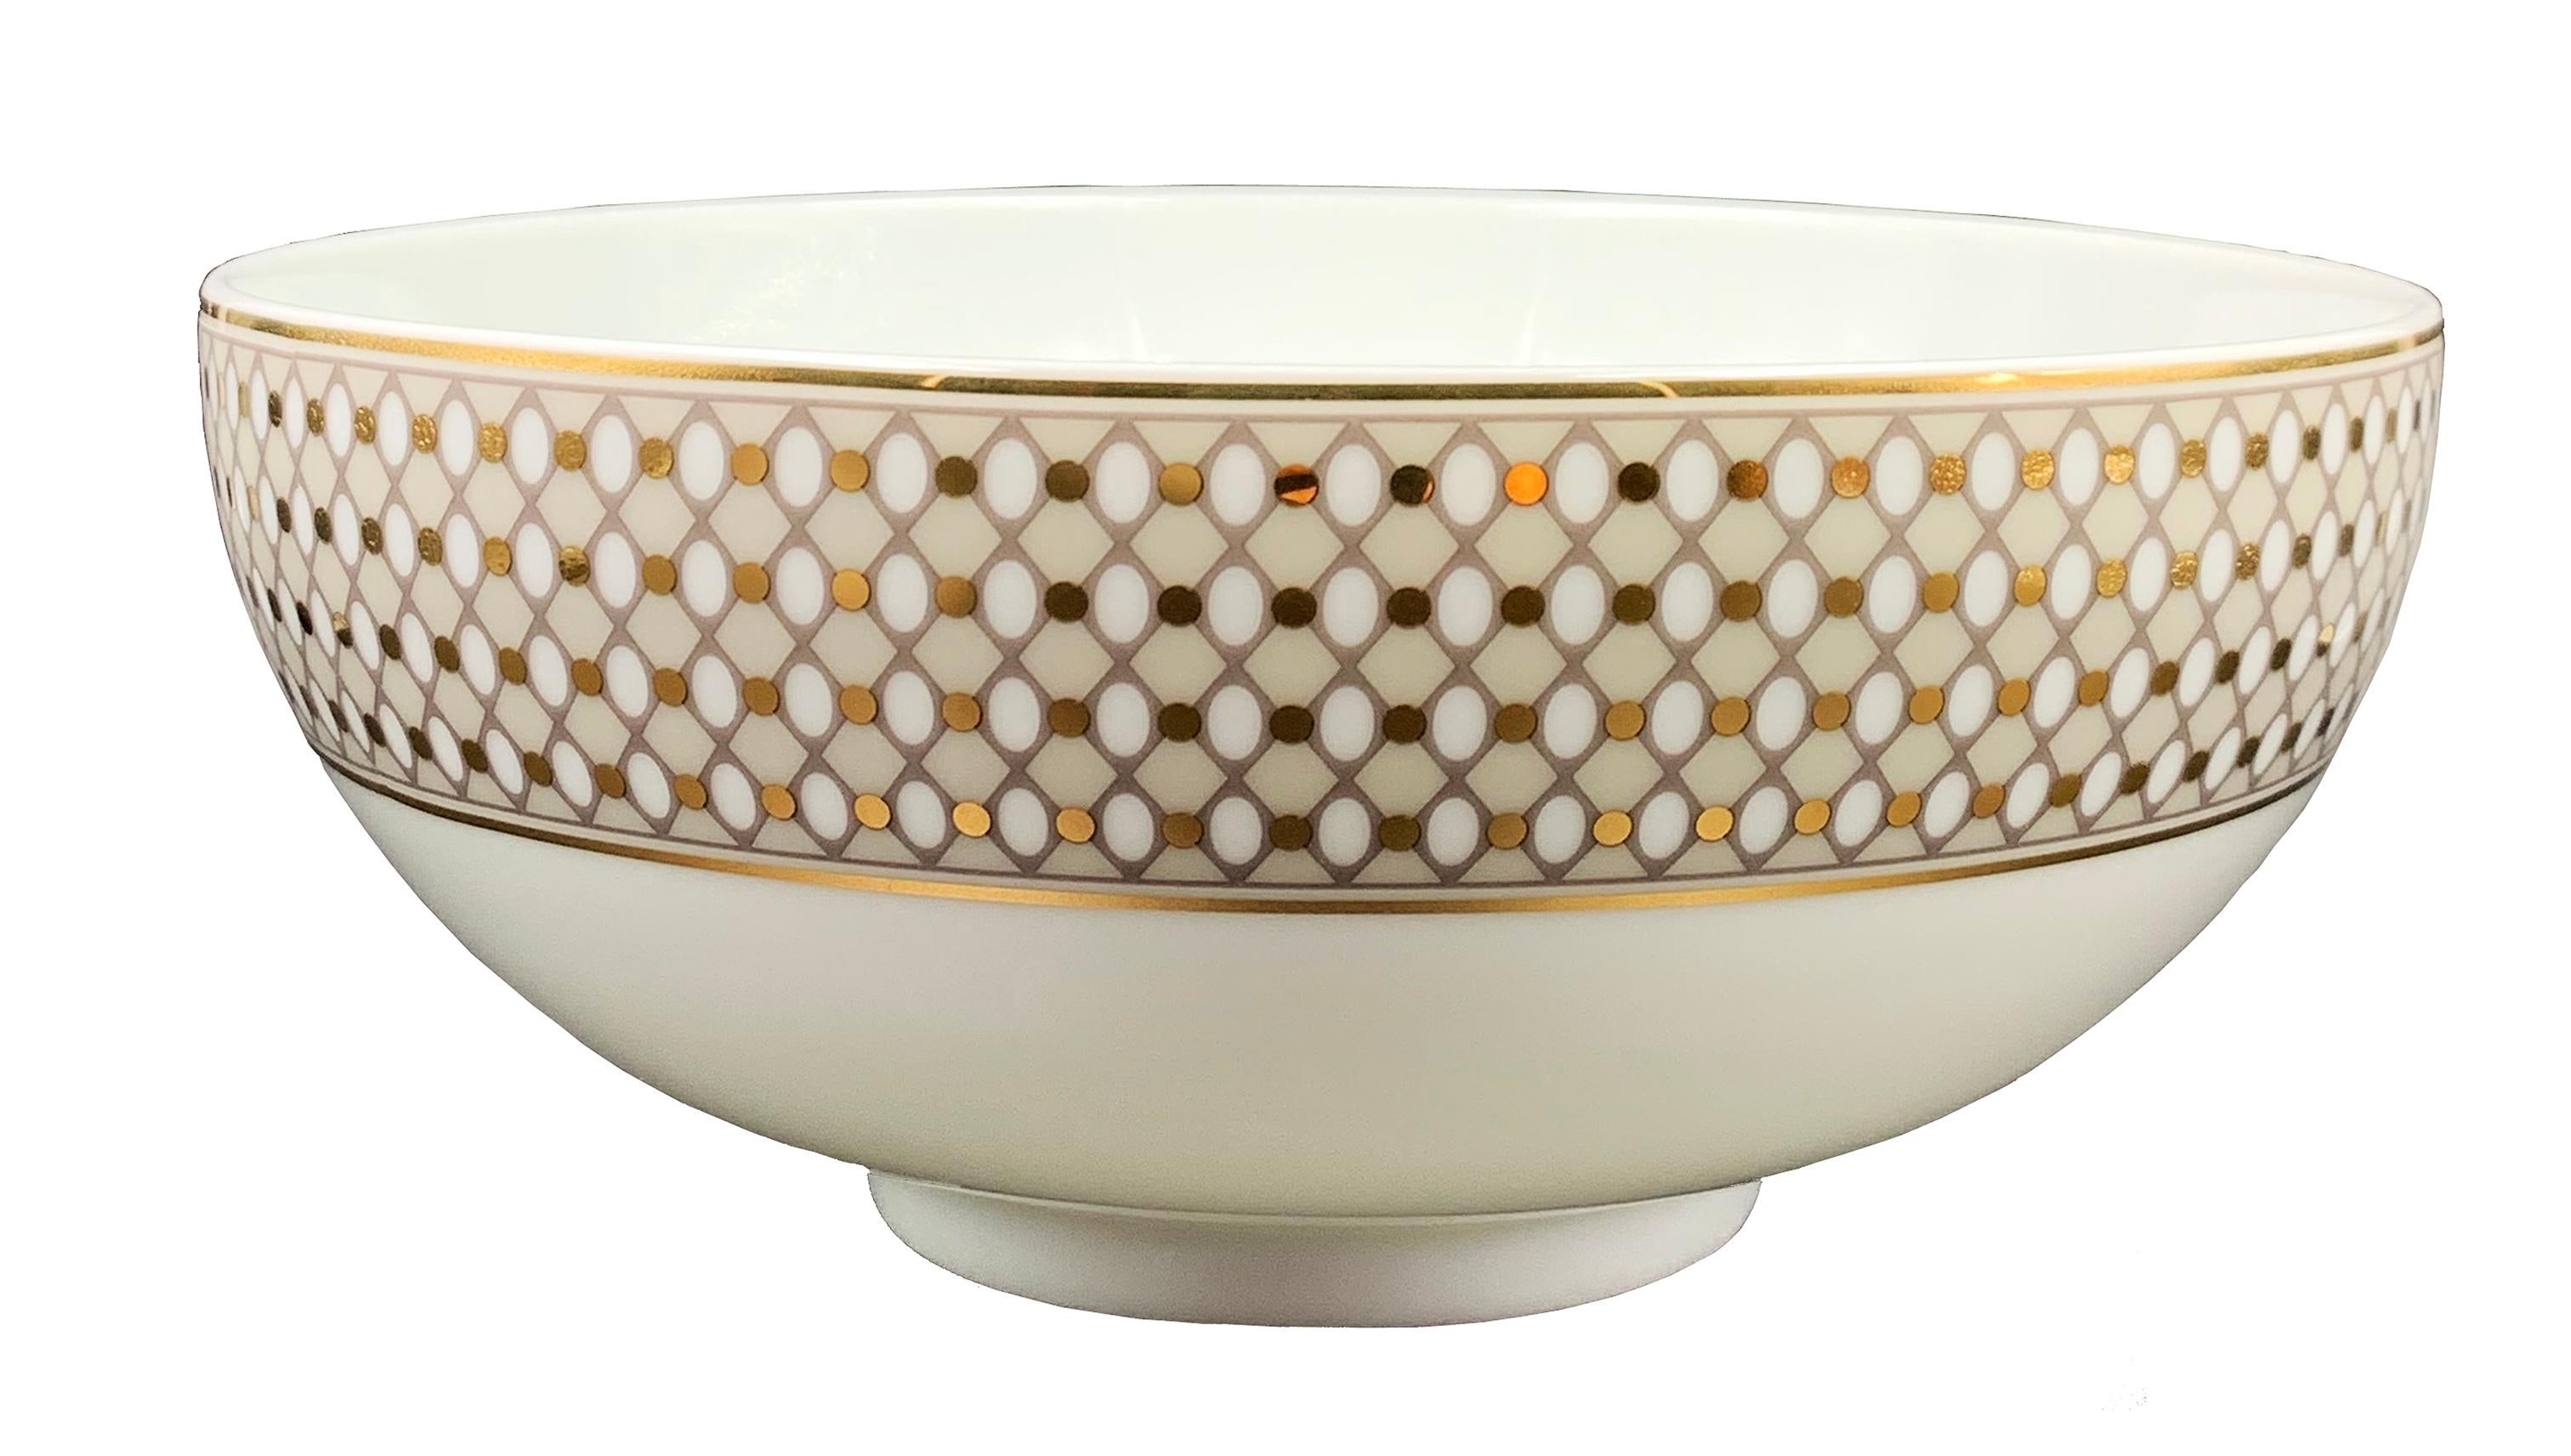 Larger quantities available upon request, with 8 weeks production time.

Description: Large noodle salad bowl (2 pieces)
Color: Beige and gold
Size: 20 Ø x 8.5 H cm, 1300ml
Material: Porcelain and gold
Collection: Modern Vintage.